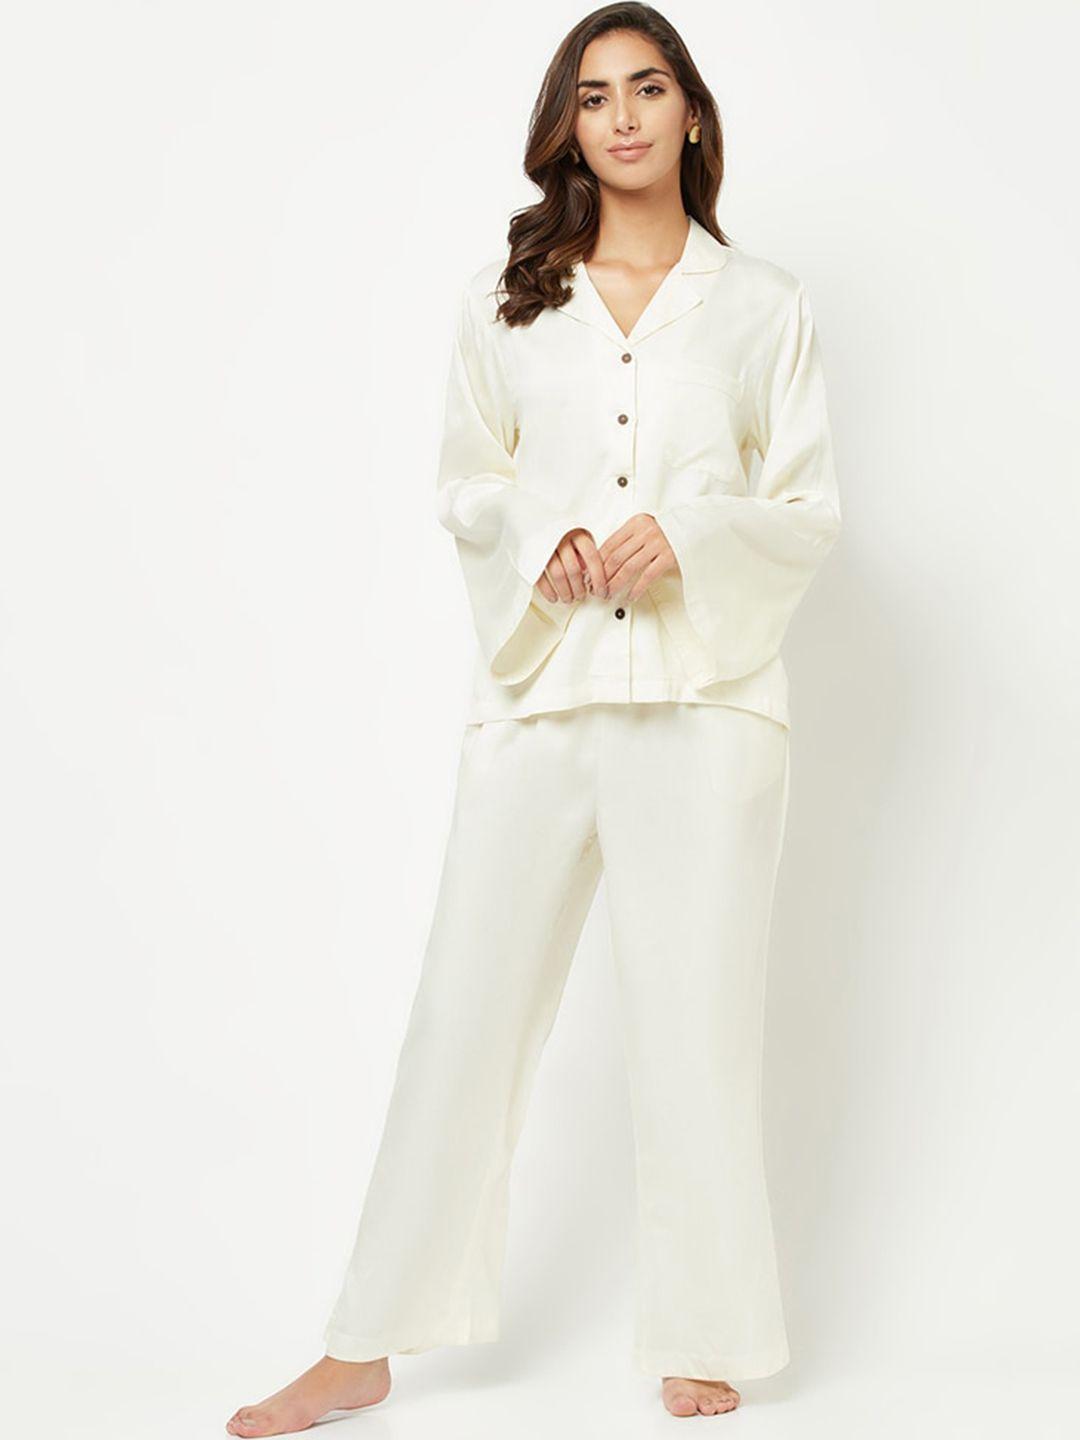 house of s women night suit